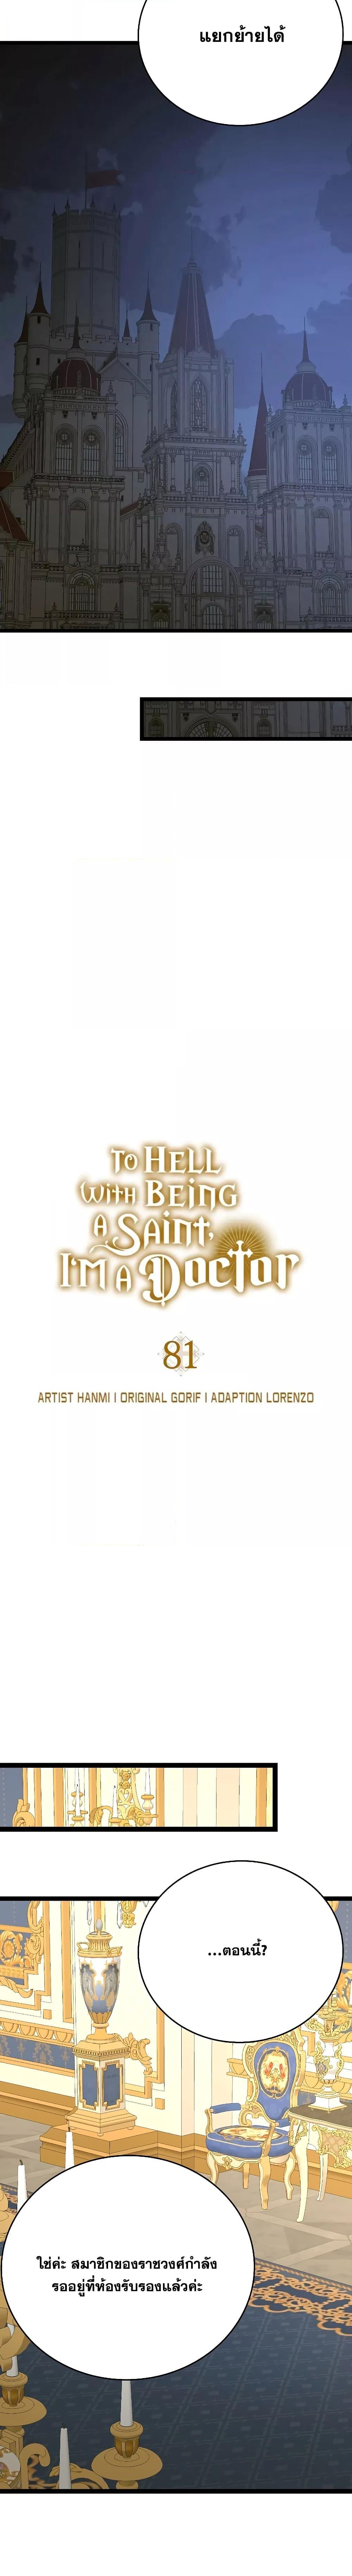 To Hell With Being A Saint, Iโ€m A Doctor เธ•เธญเธเธ—เธตเน 81 (15)